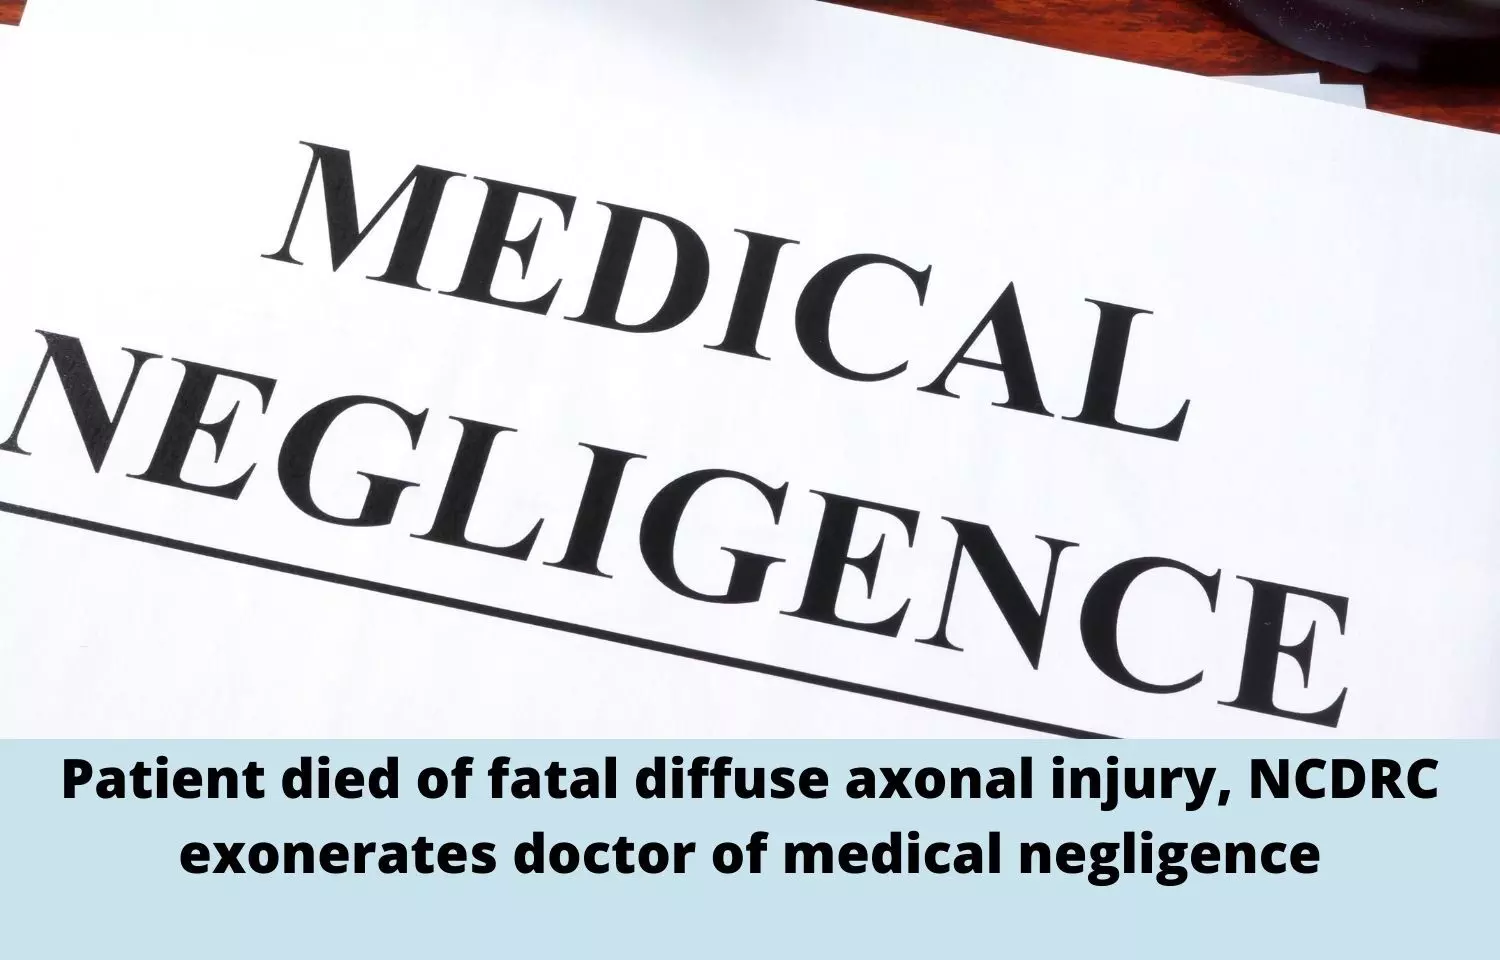 Patient died of fatal diffuse axonal injury, NCDRC exonerates doctor of medical negligence